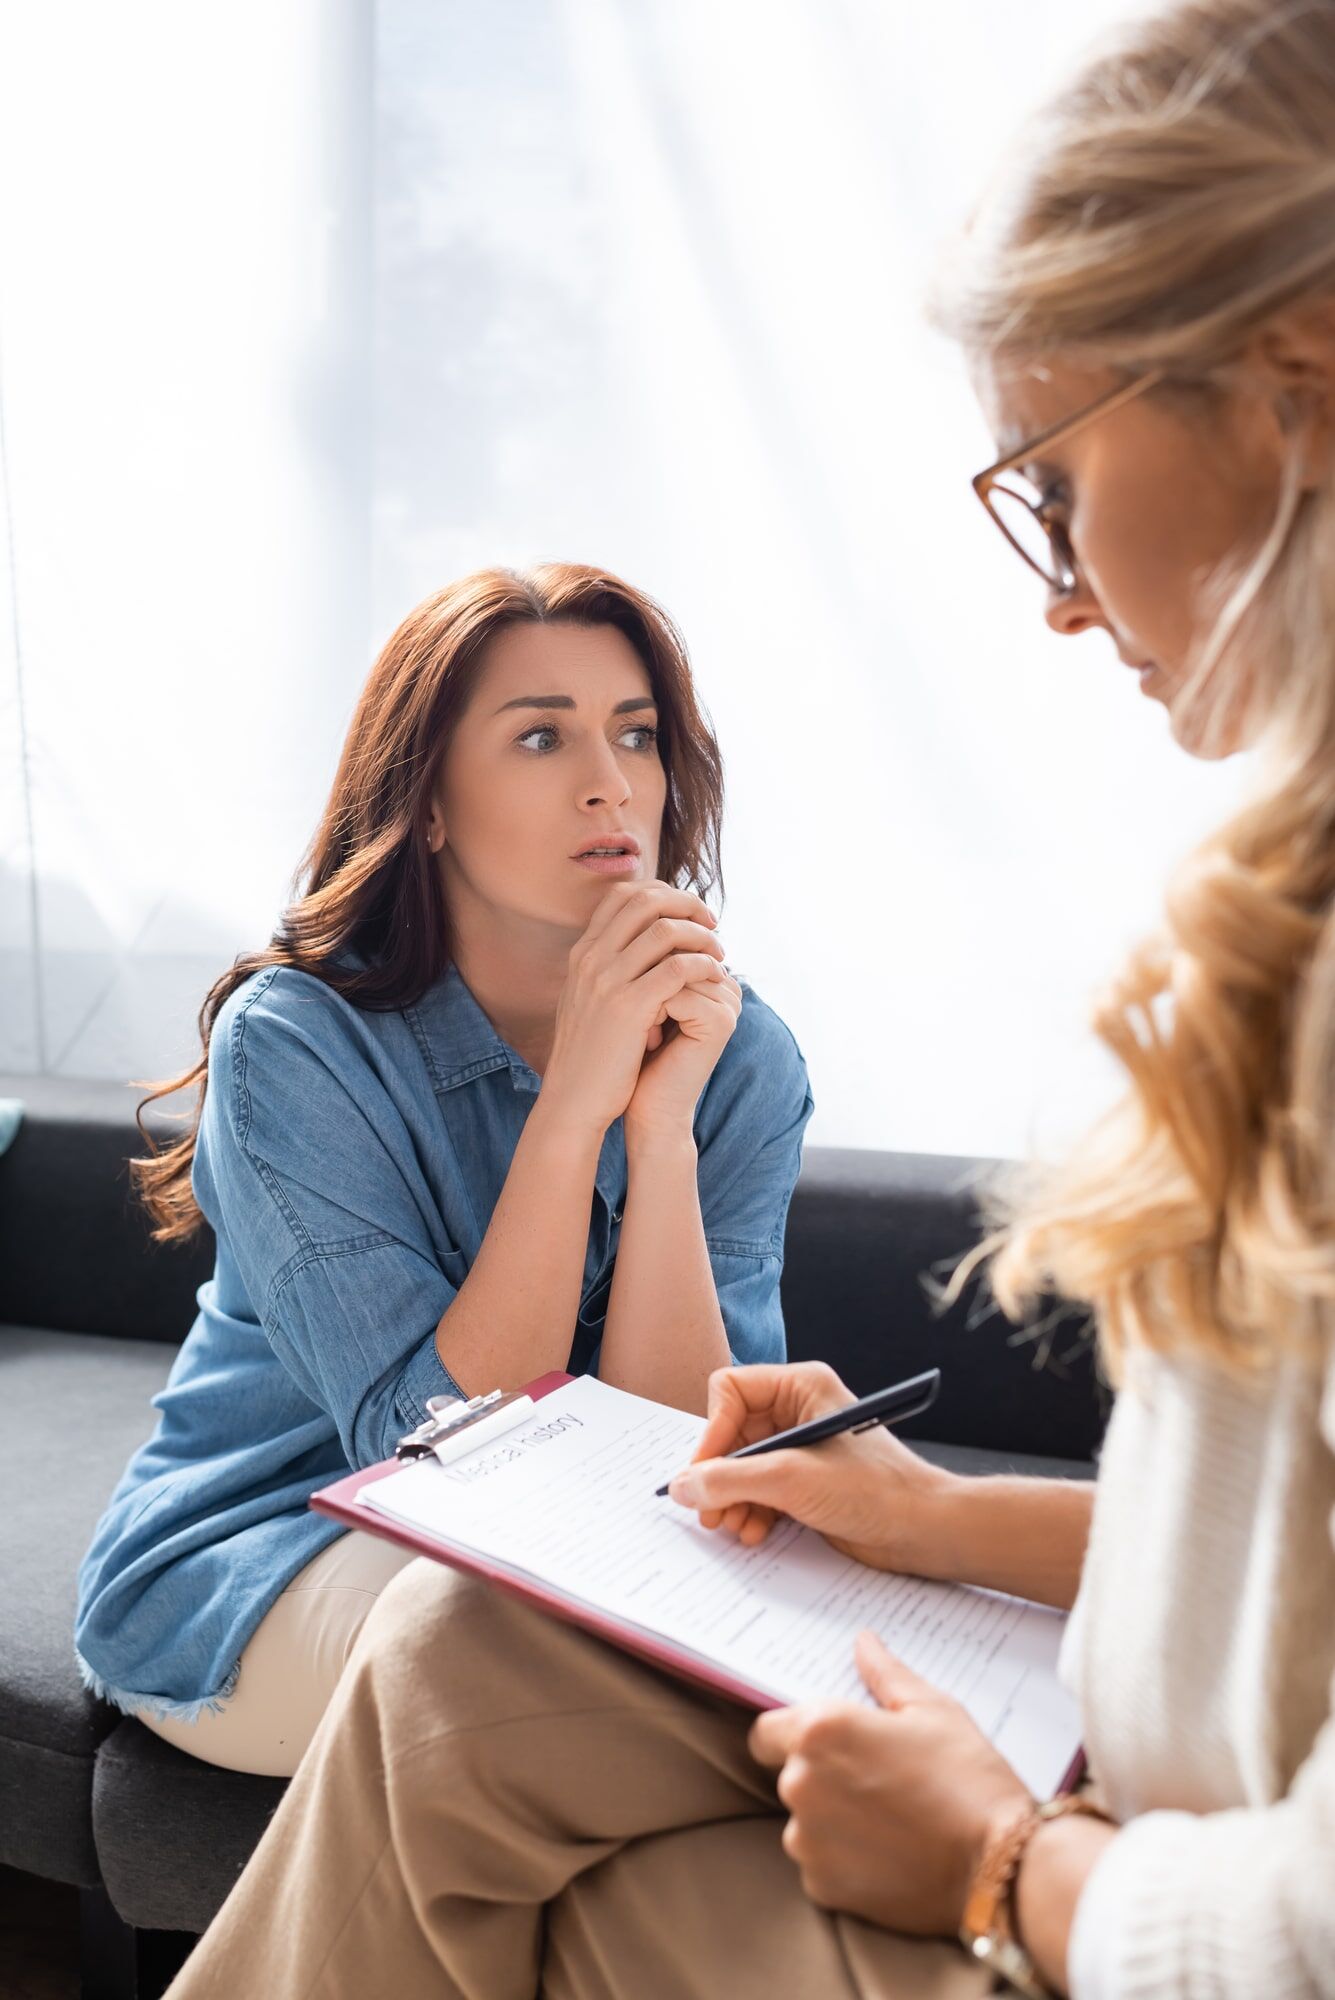 A person with a substance use disorder and mental health conditions learning about different drugs that can become addictive, as well as behavioral therapies that may be used in treatment services for addiction